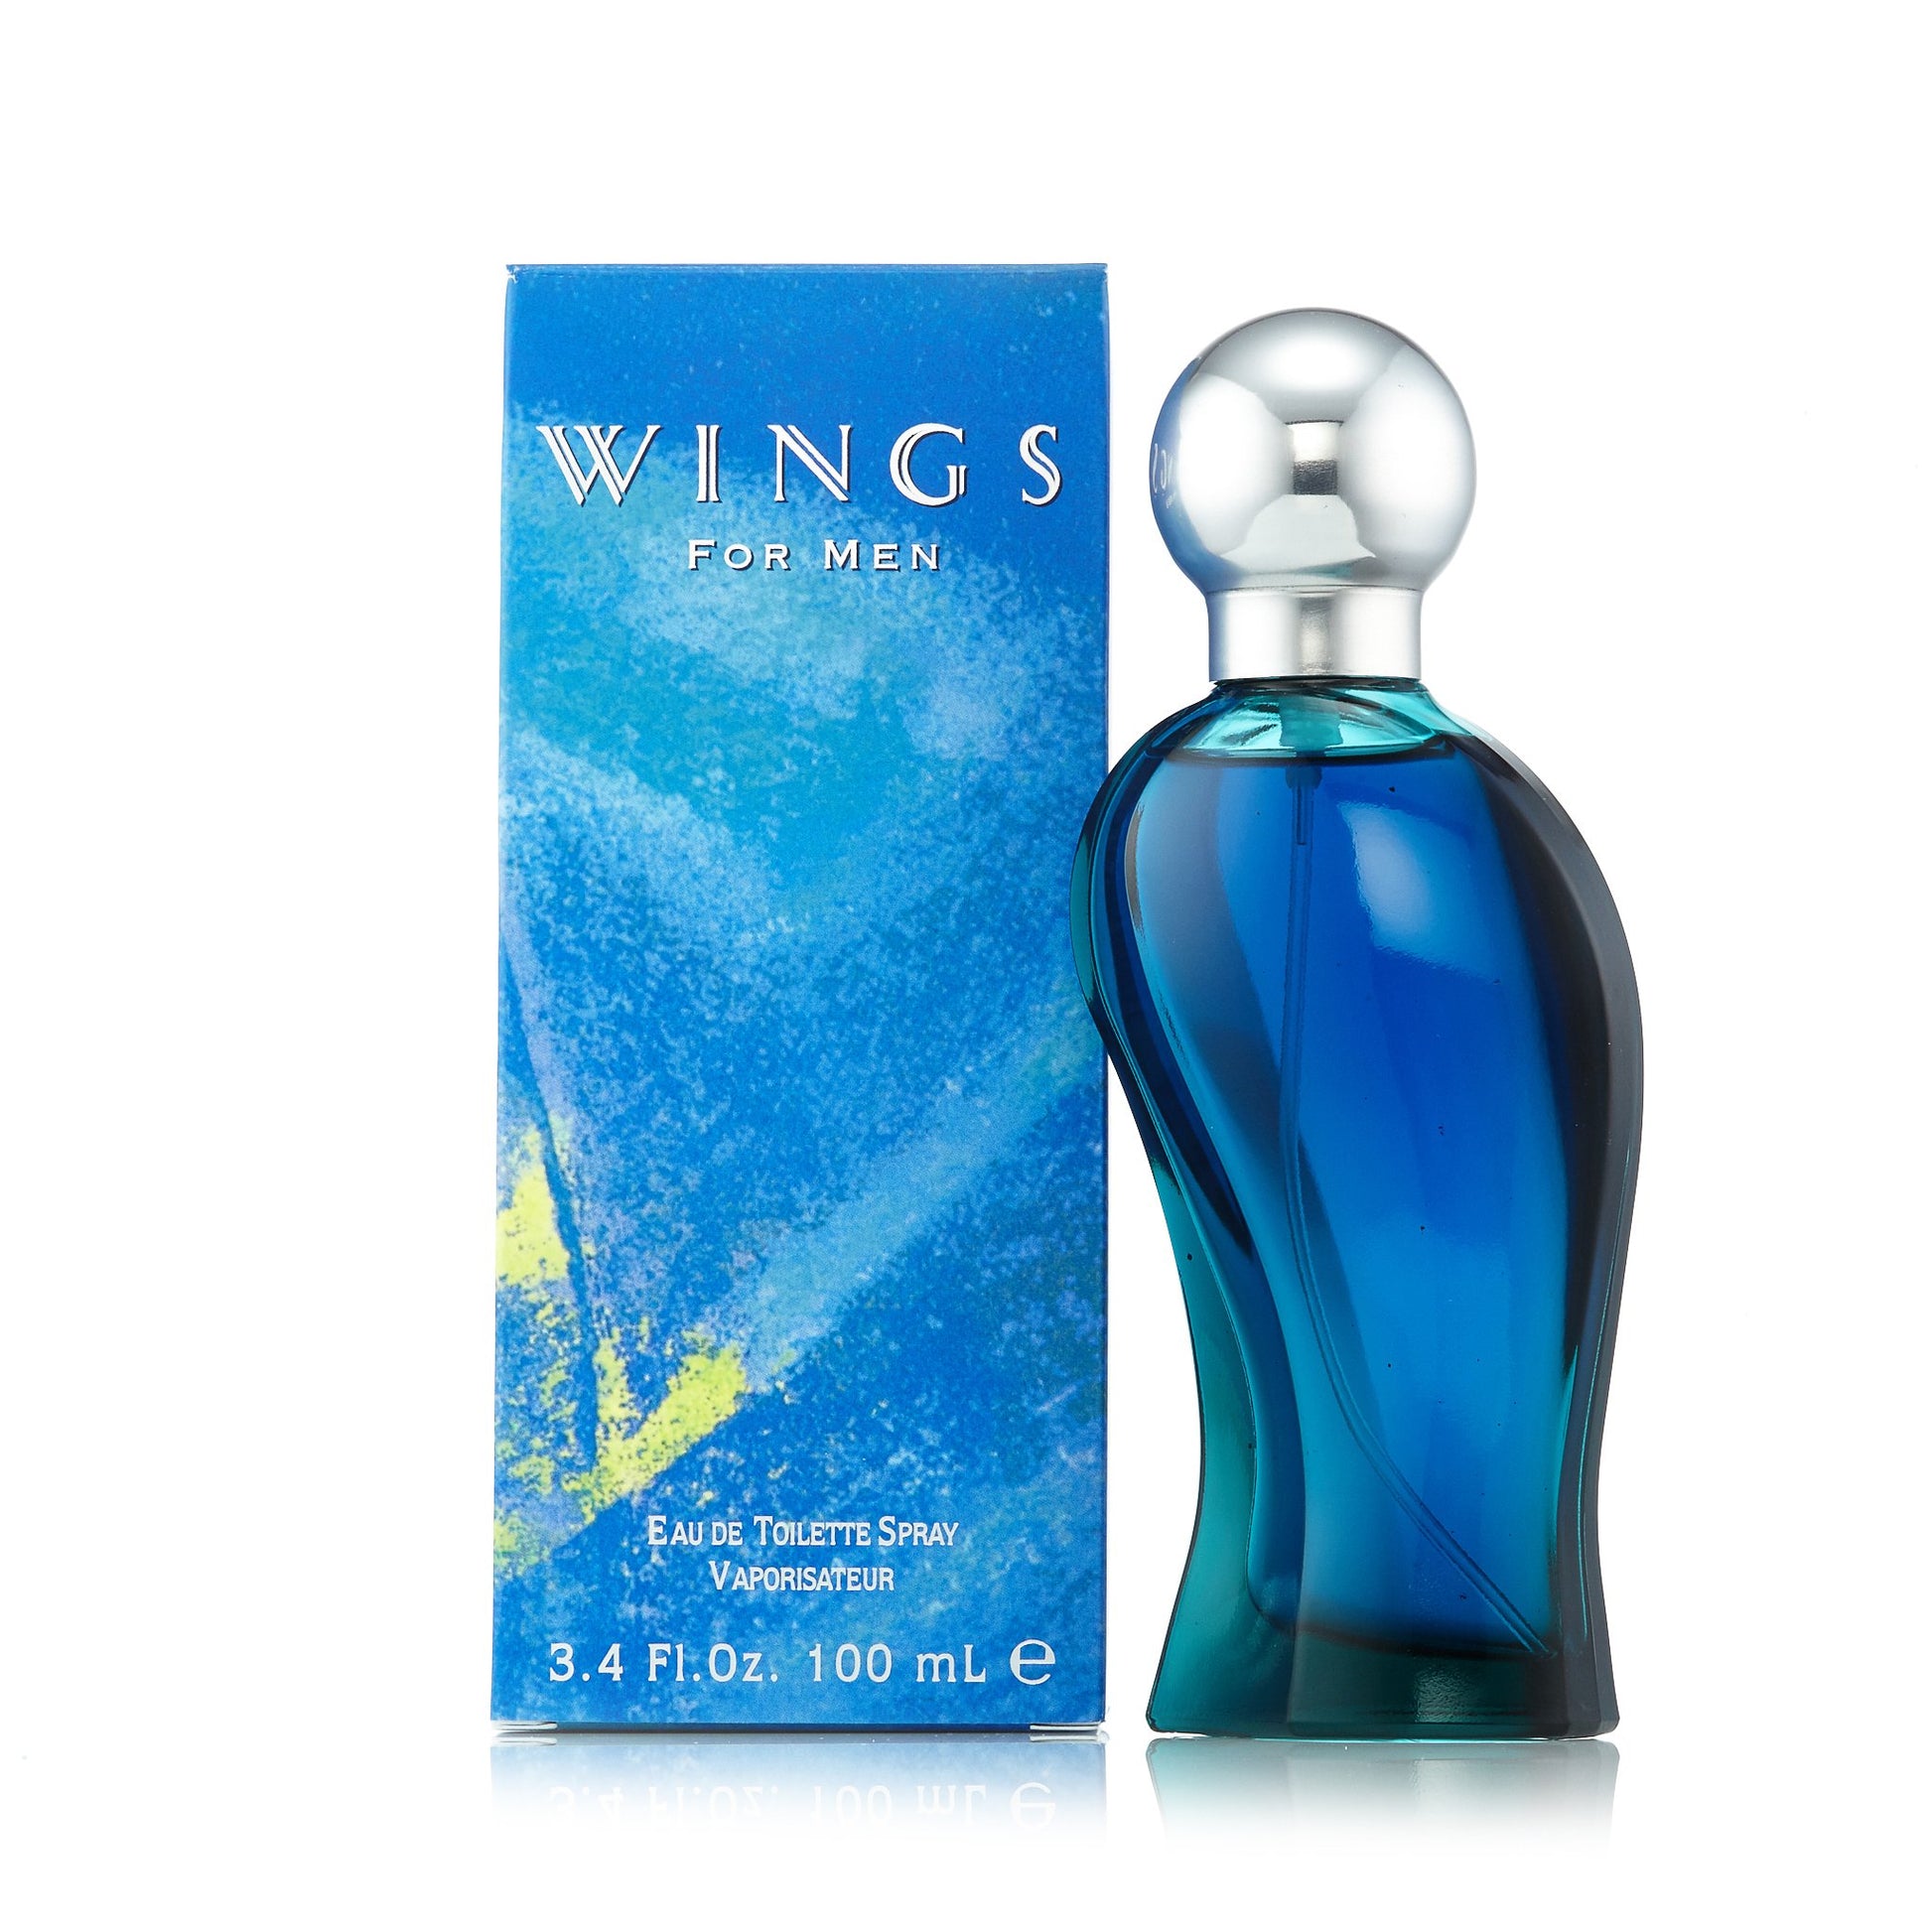 Wings Eau de Toilette Spray for Men by Beverly Hills, Product image 1